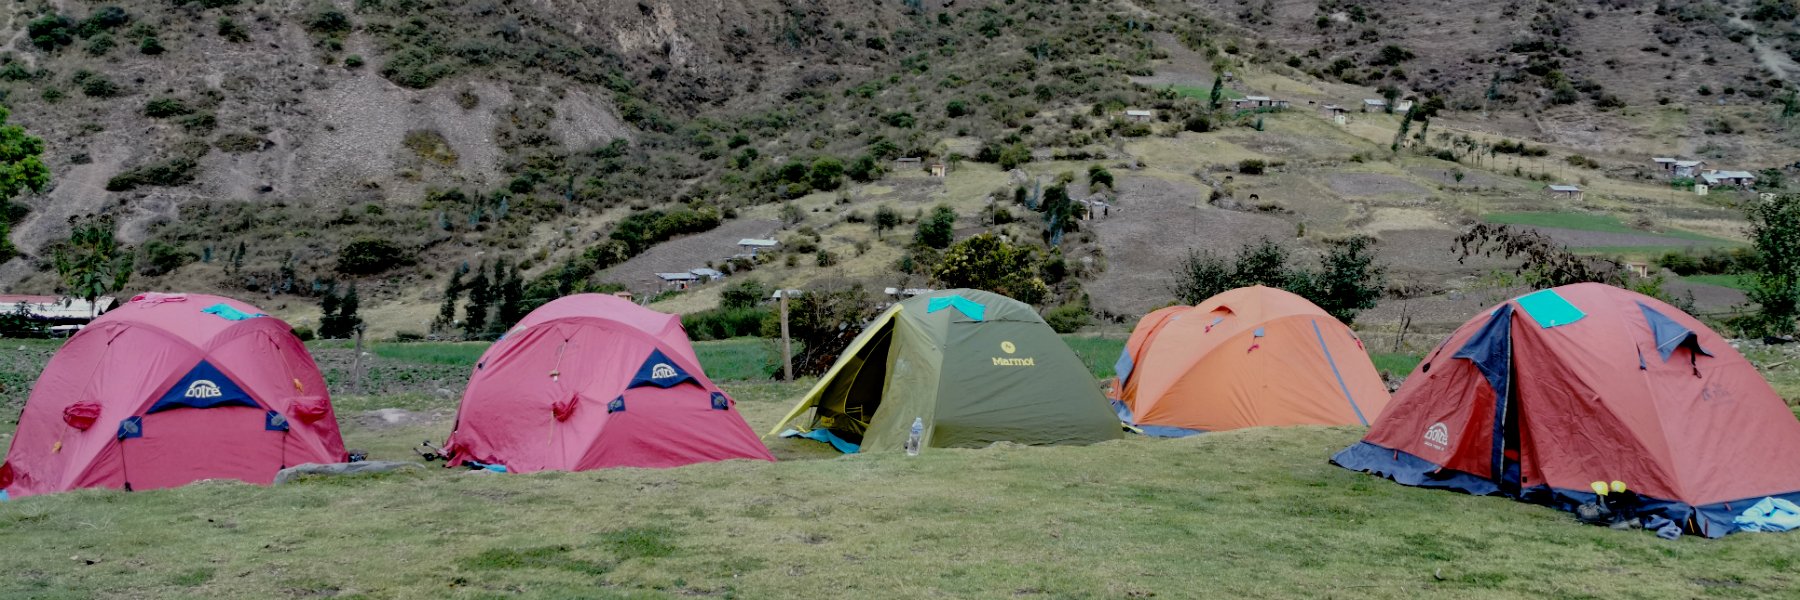 andean great treks camping tents